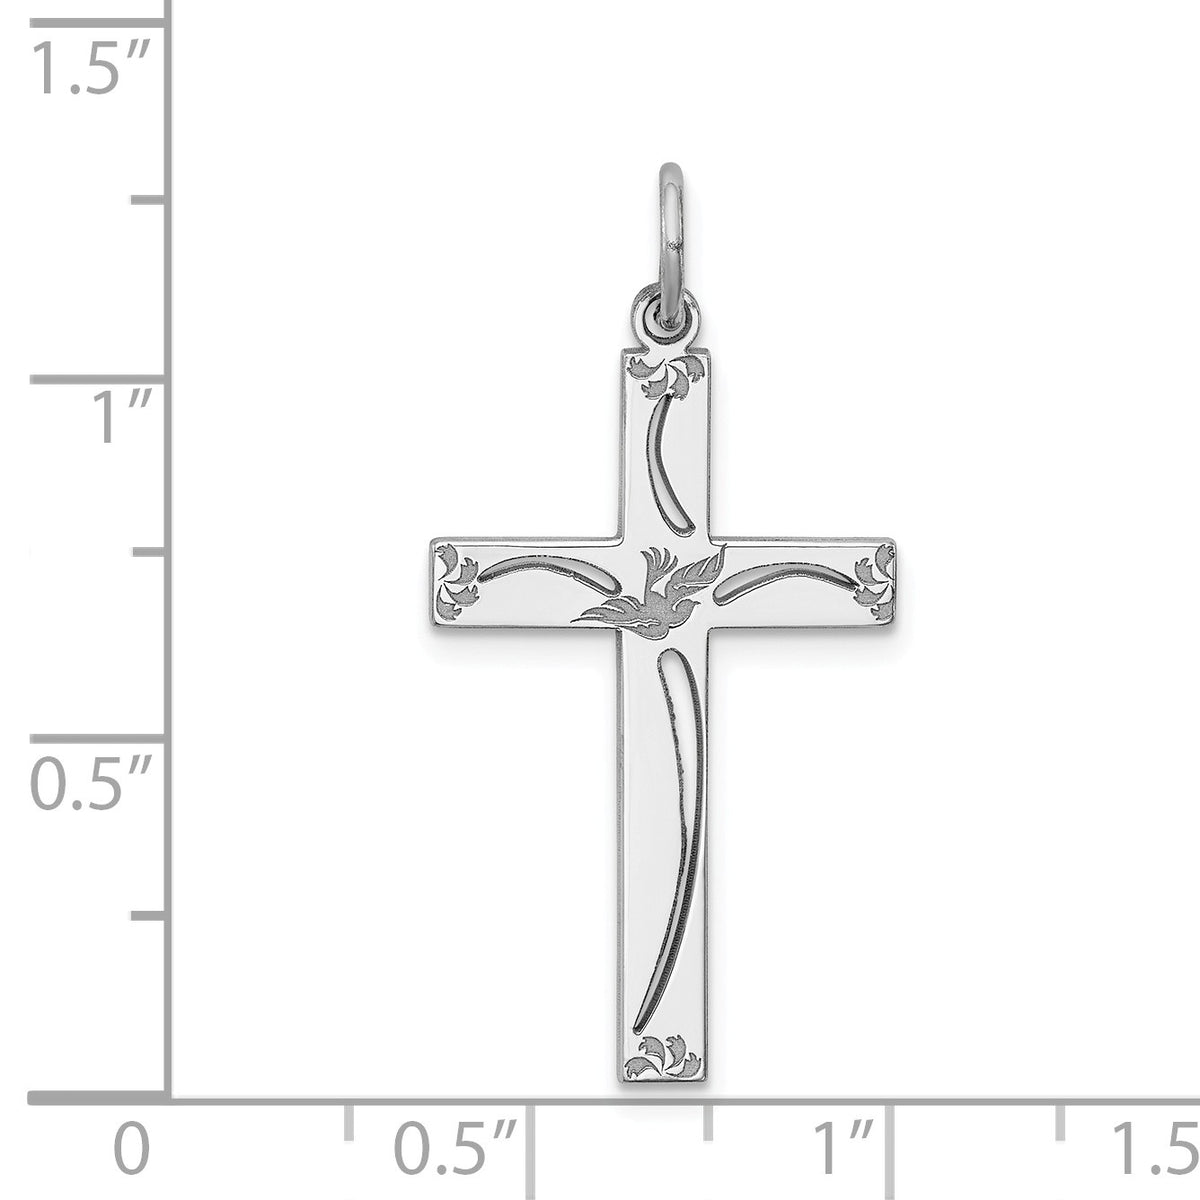 Alternate view of the Sterling Silver 25mm Laser Etched Cross Pendant by The Black Bow Jewelry Co.